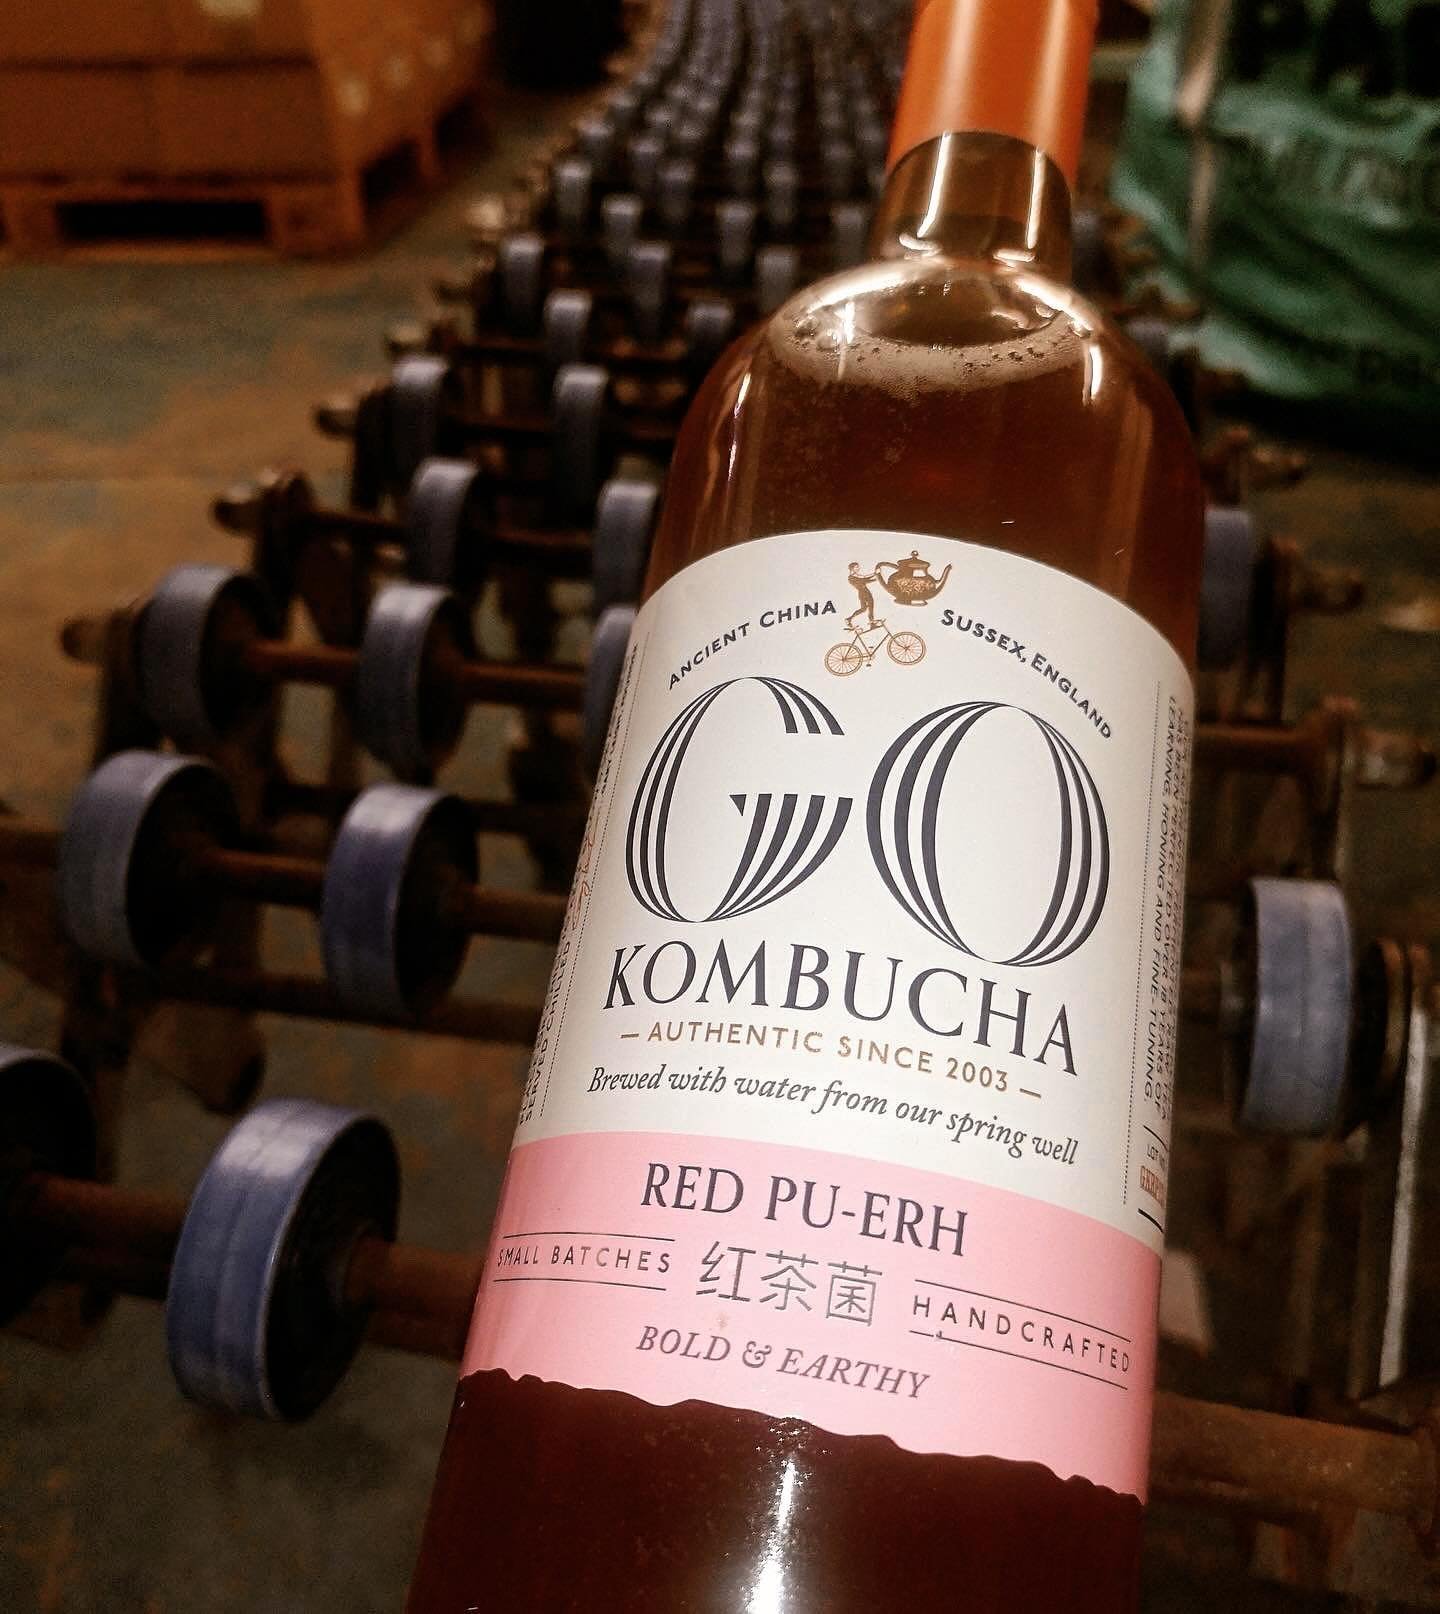 For those who like their kombucha with more strength and plenty of oomph, Red Pu-erh 750ml is our strongest variety. Bold &amp; earthy with taste notes similar to craft cider. Pu-erh is also known as the metabolism tea as it is known to boost metabol